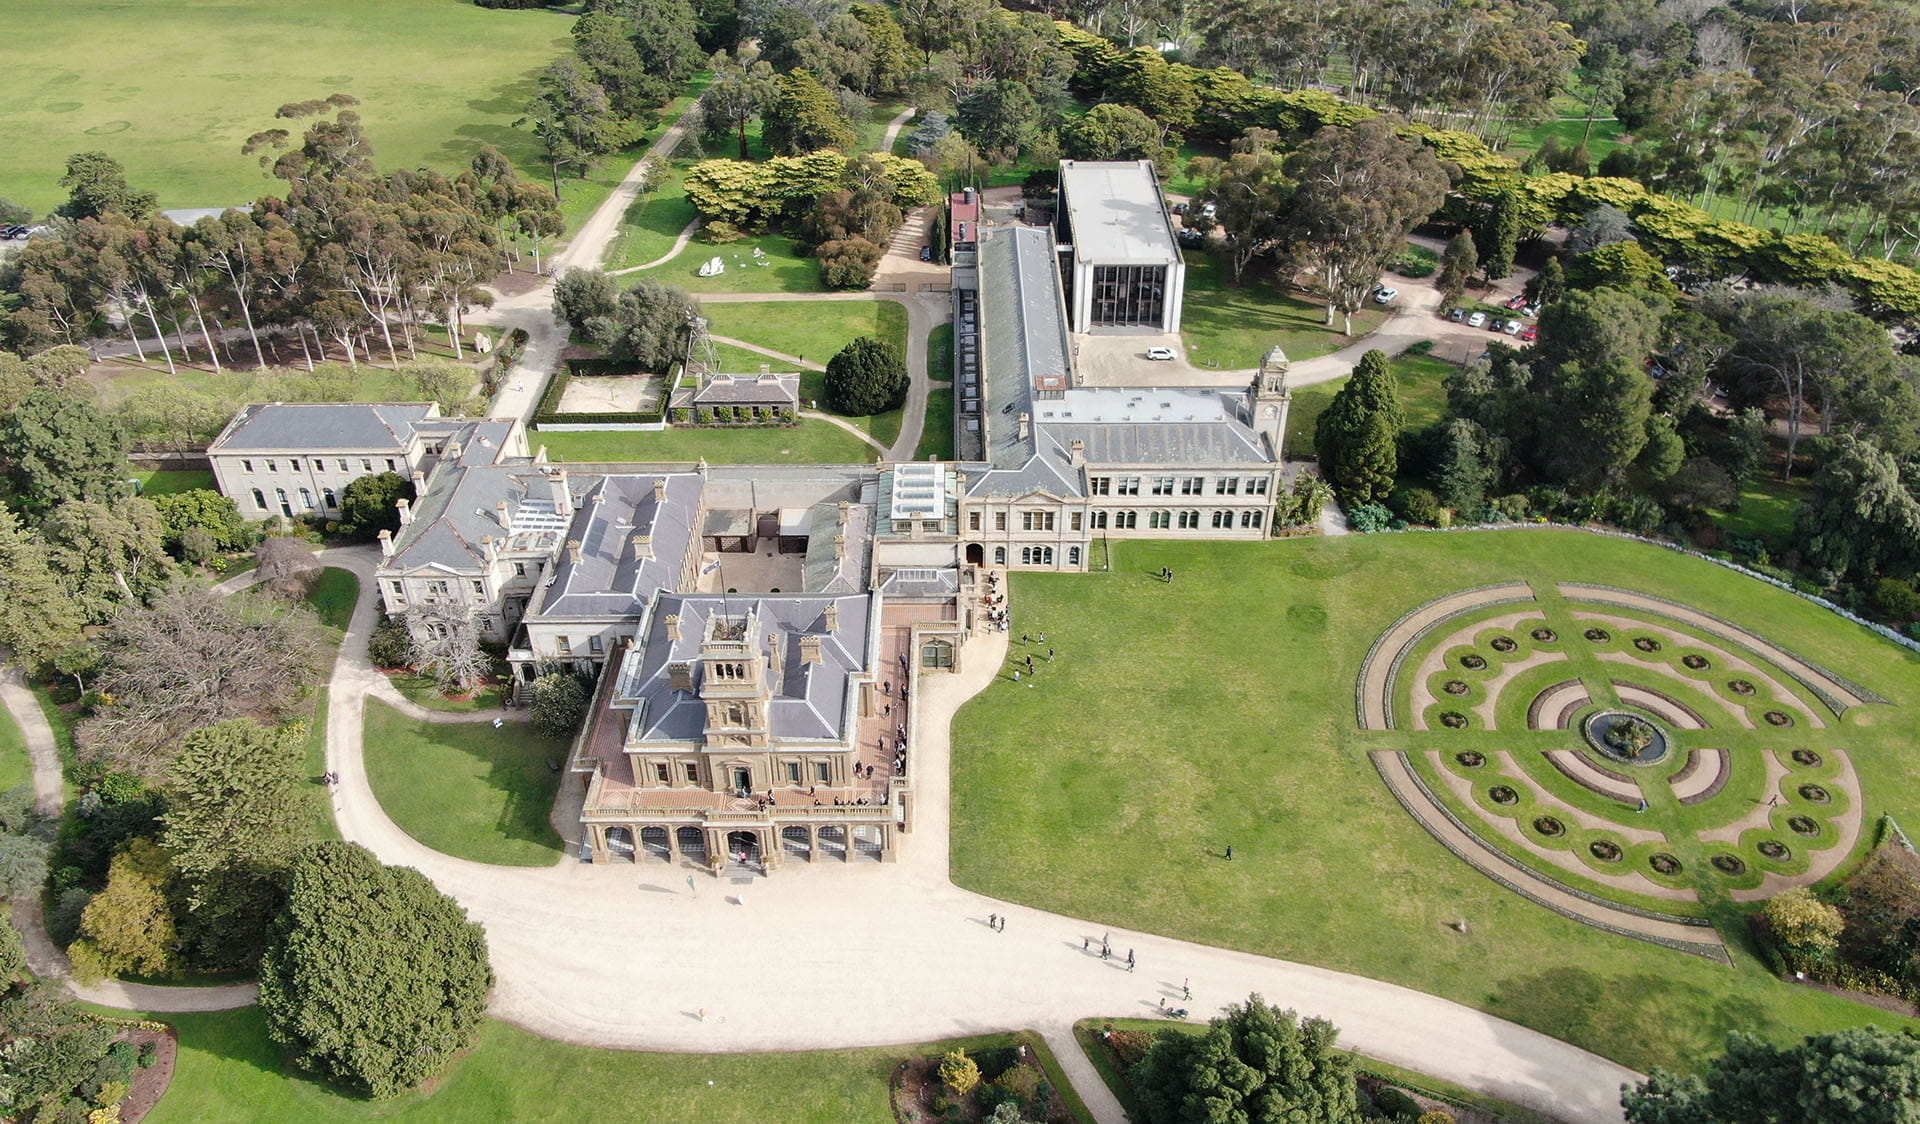 Overview of Werribee Park Mansion.